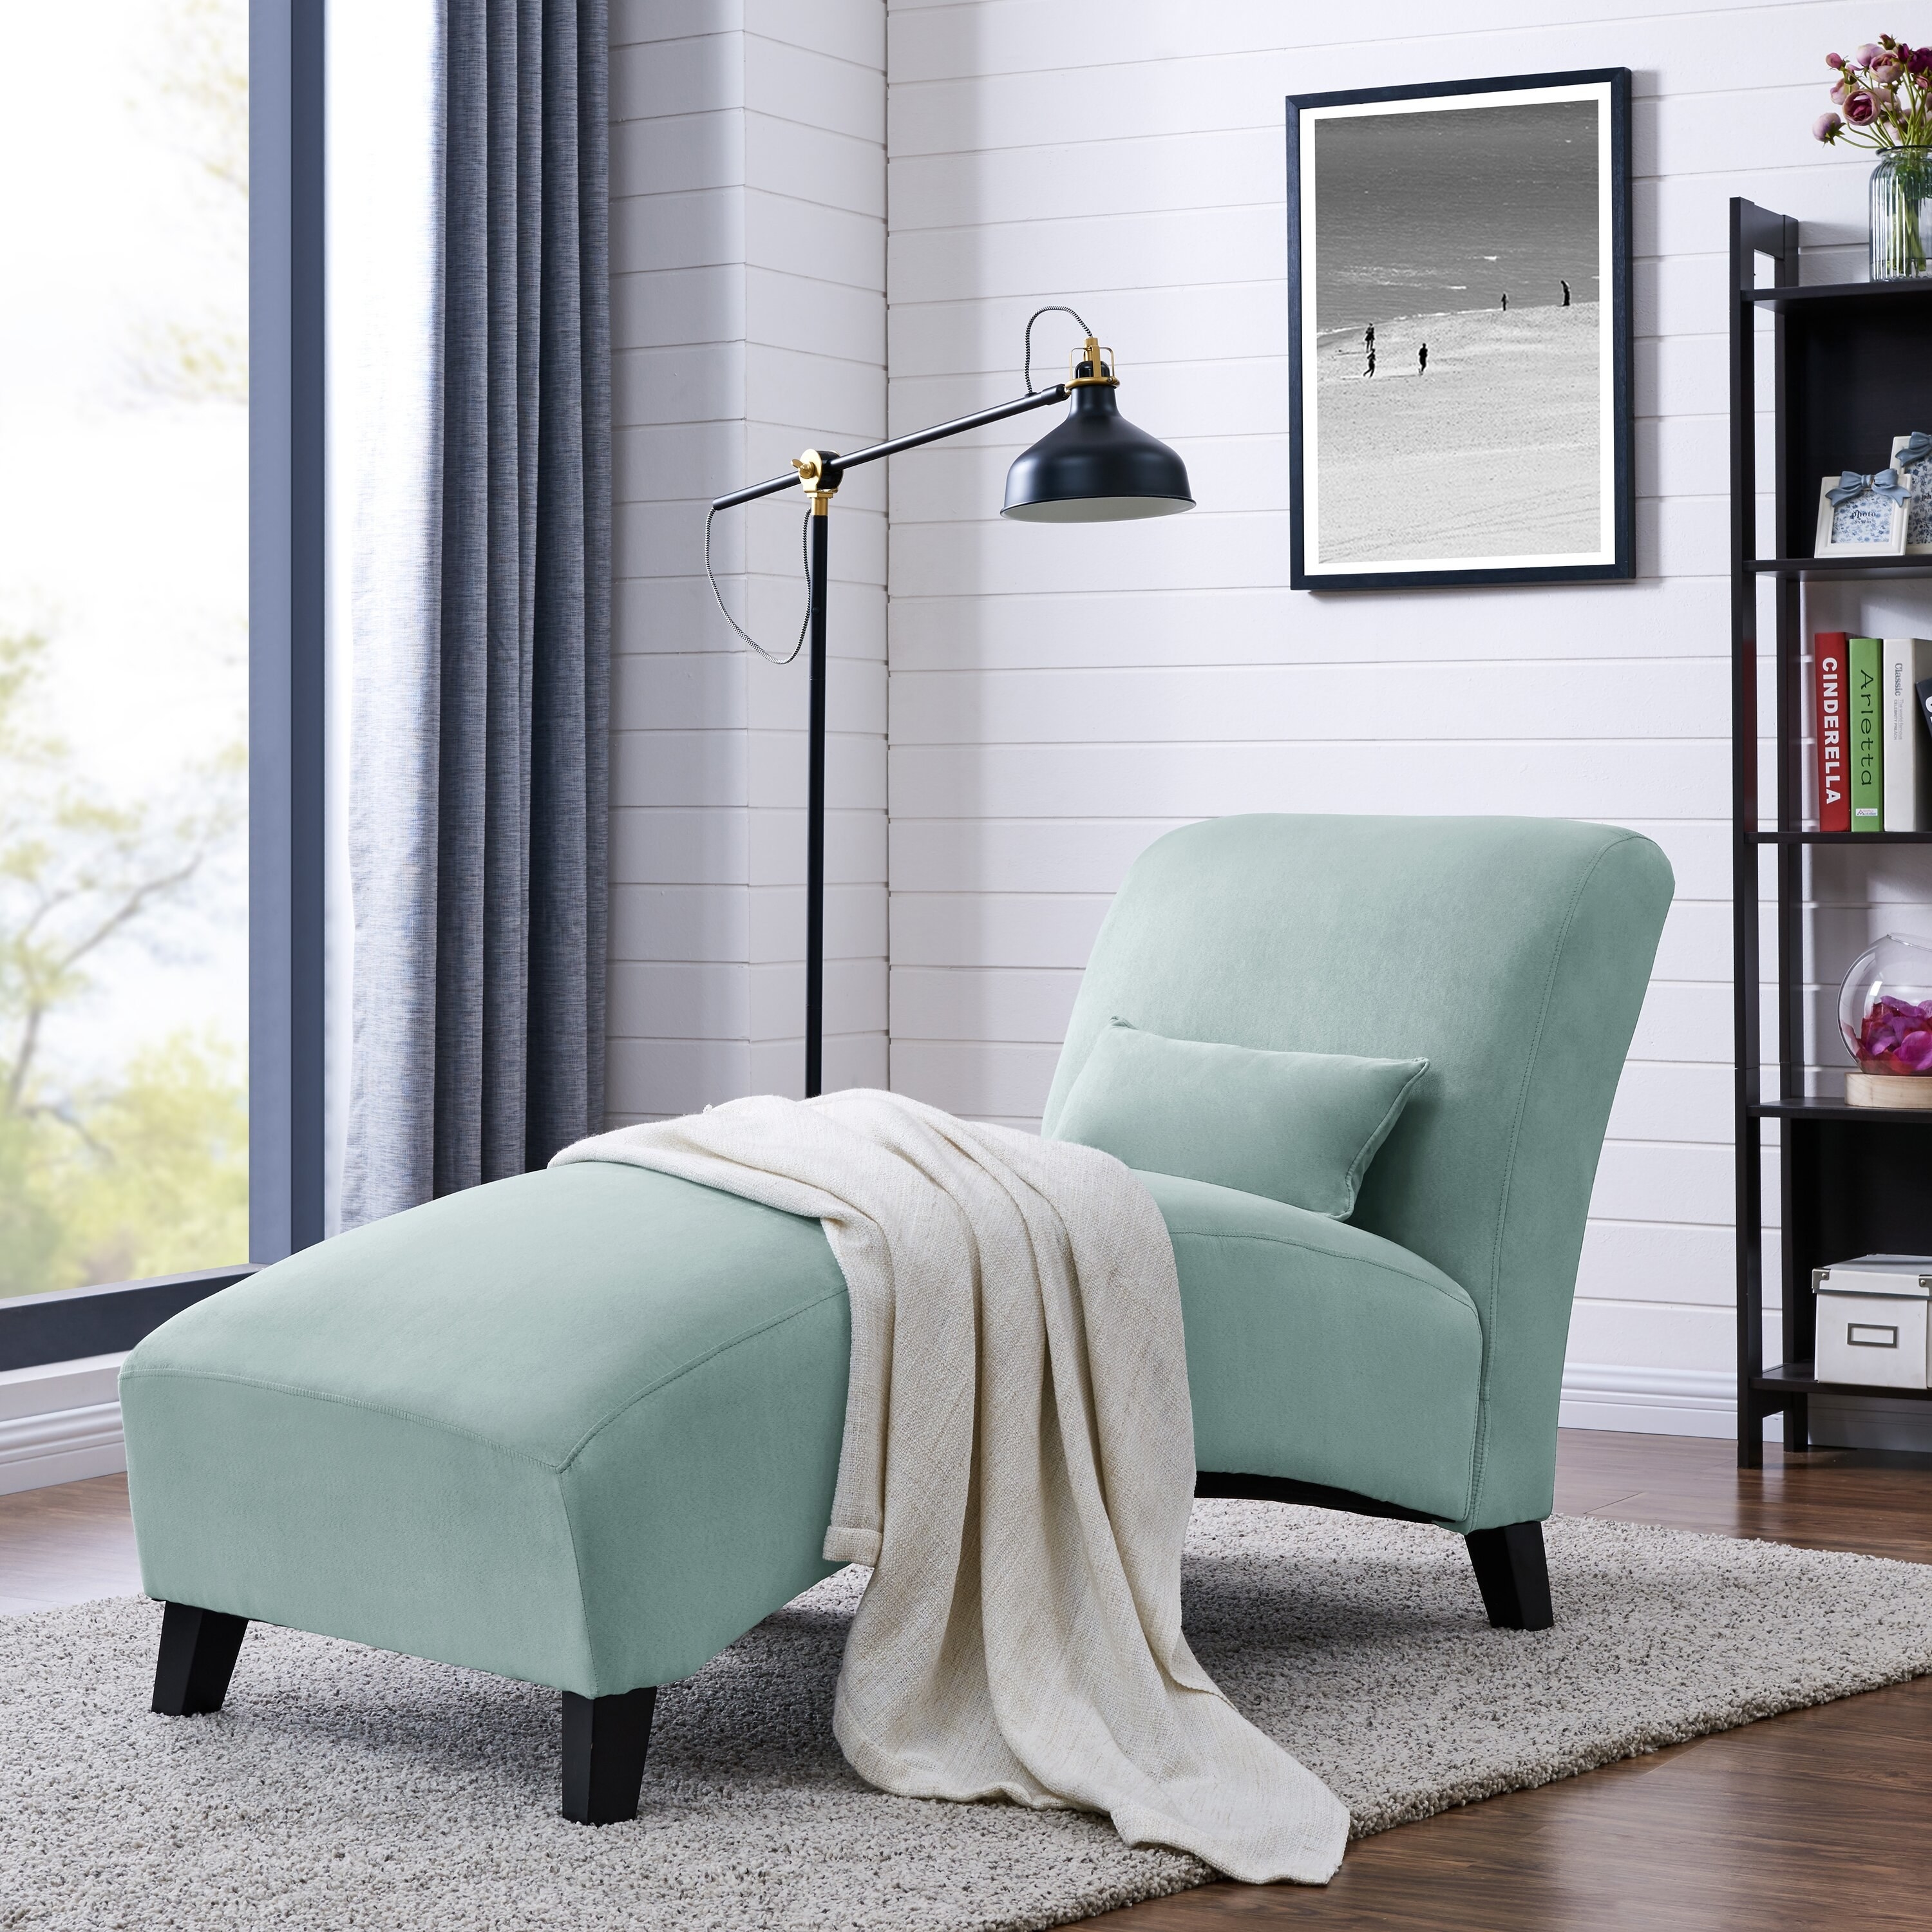 the chaise lounge in sky blue